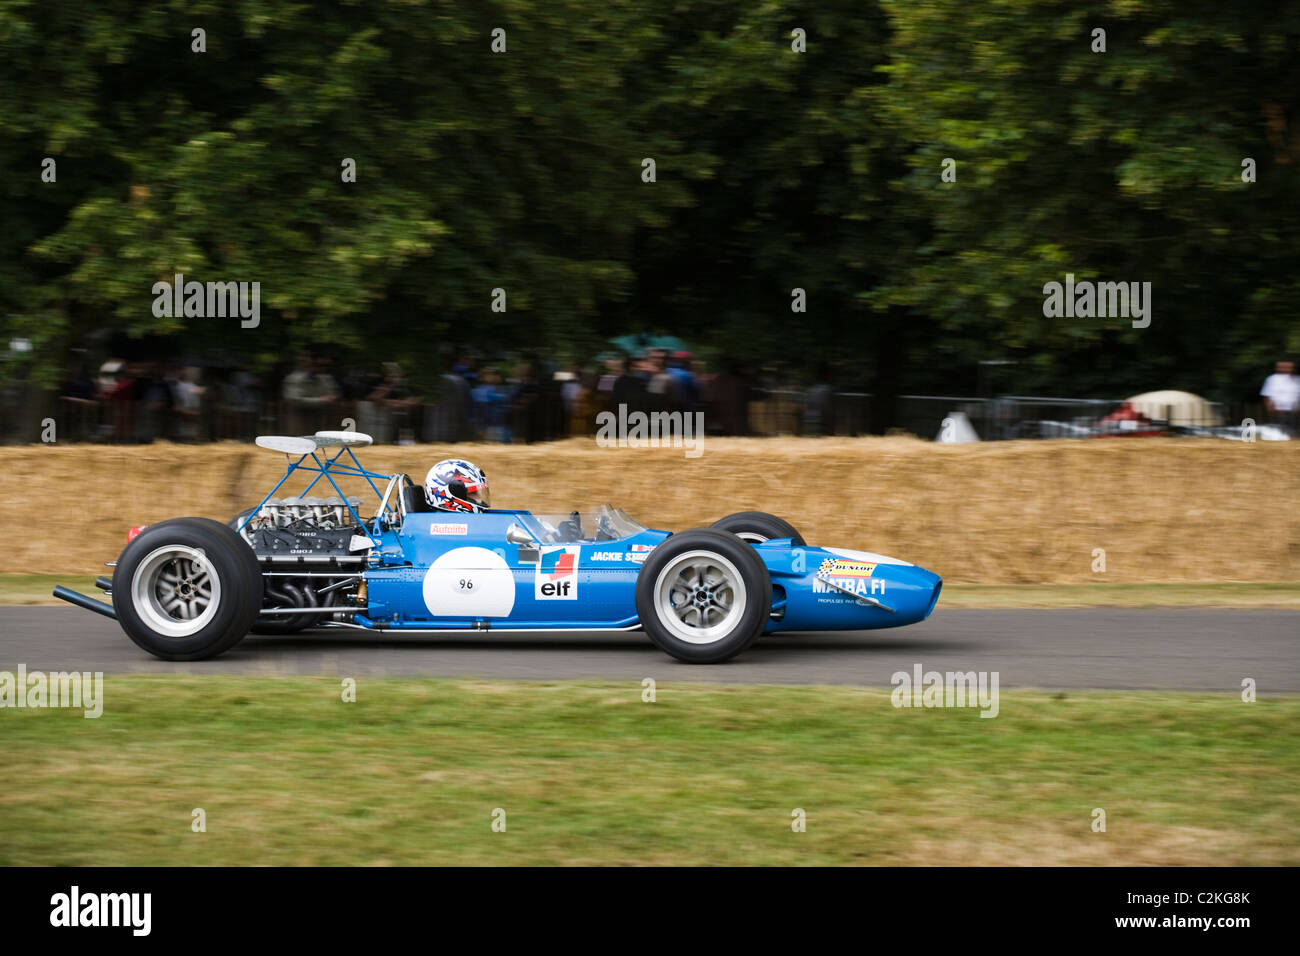 Matra Cosworth F1 voiture à Goodwood Festival of Speed, Sussex, UK Banque D'Images